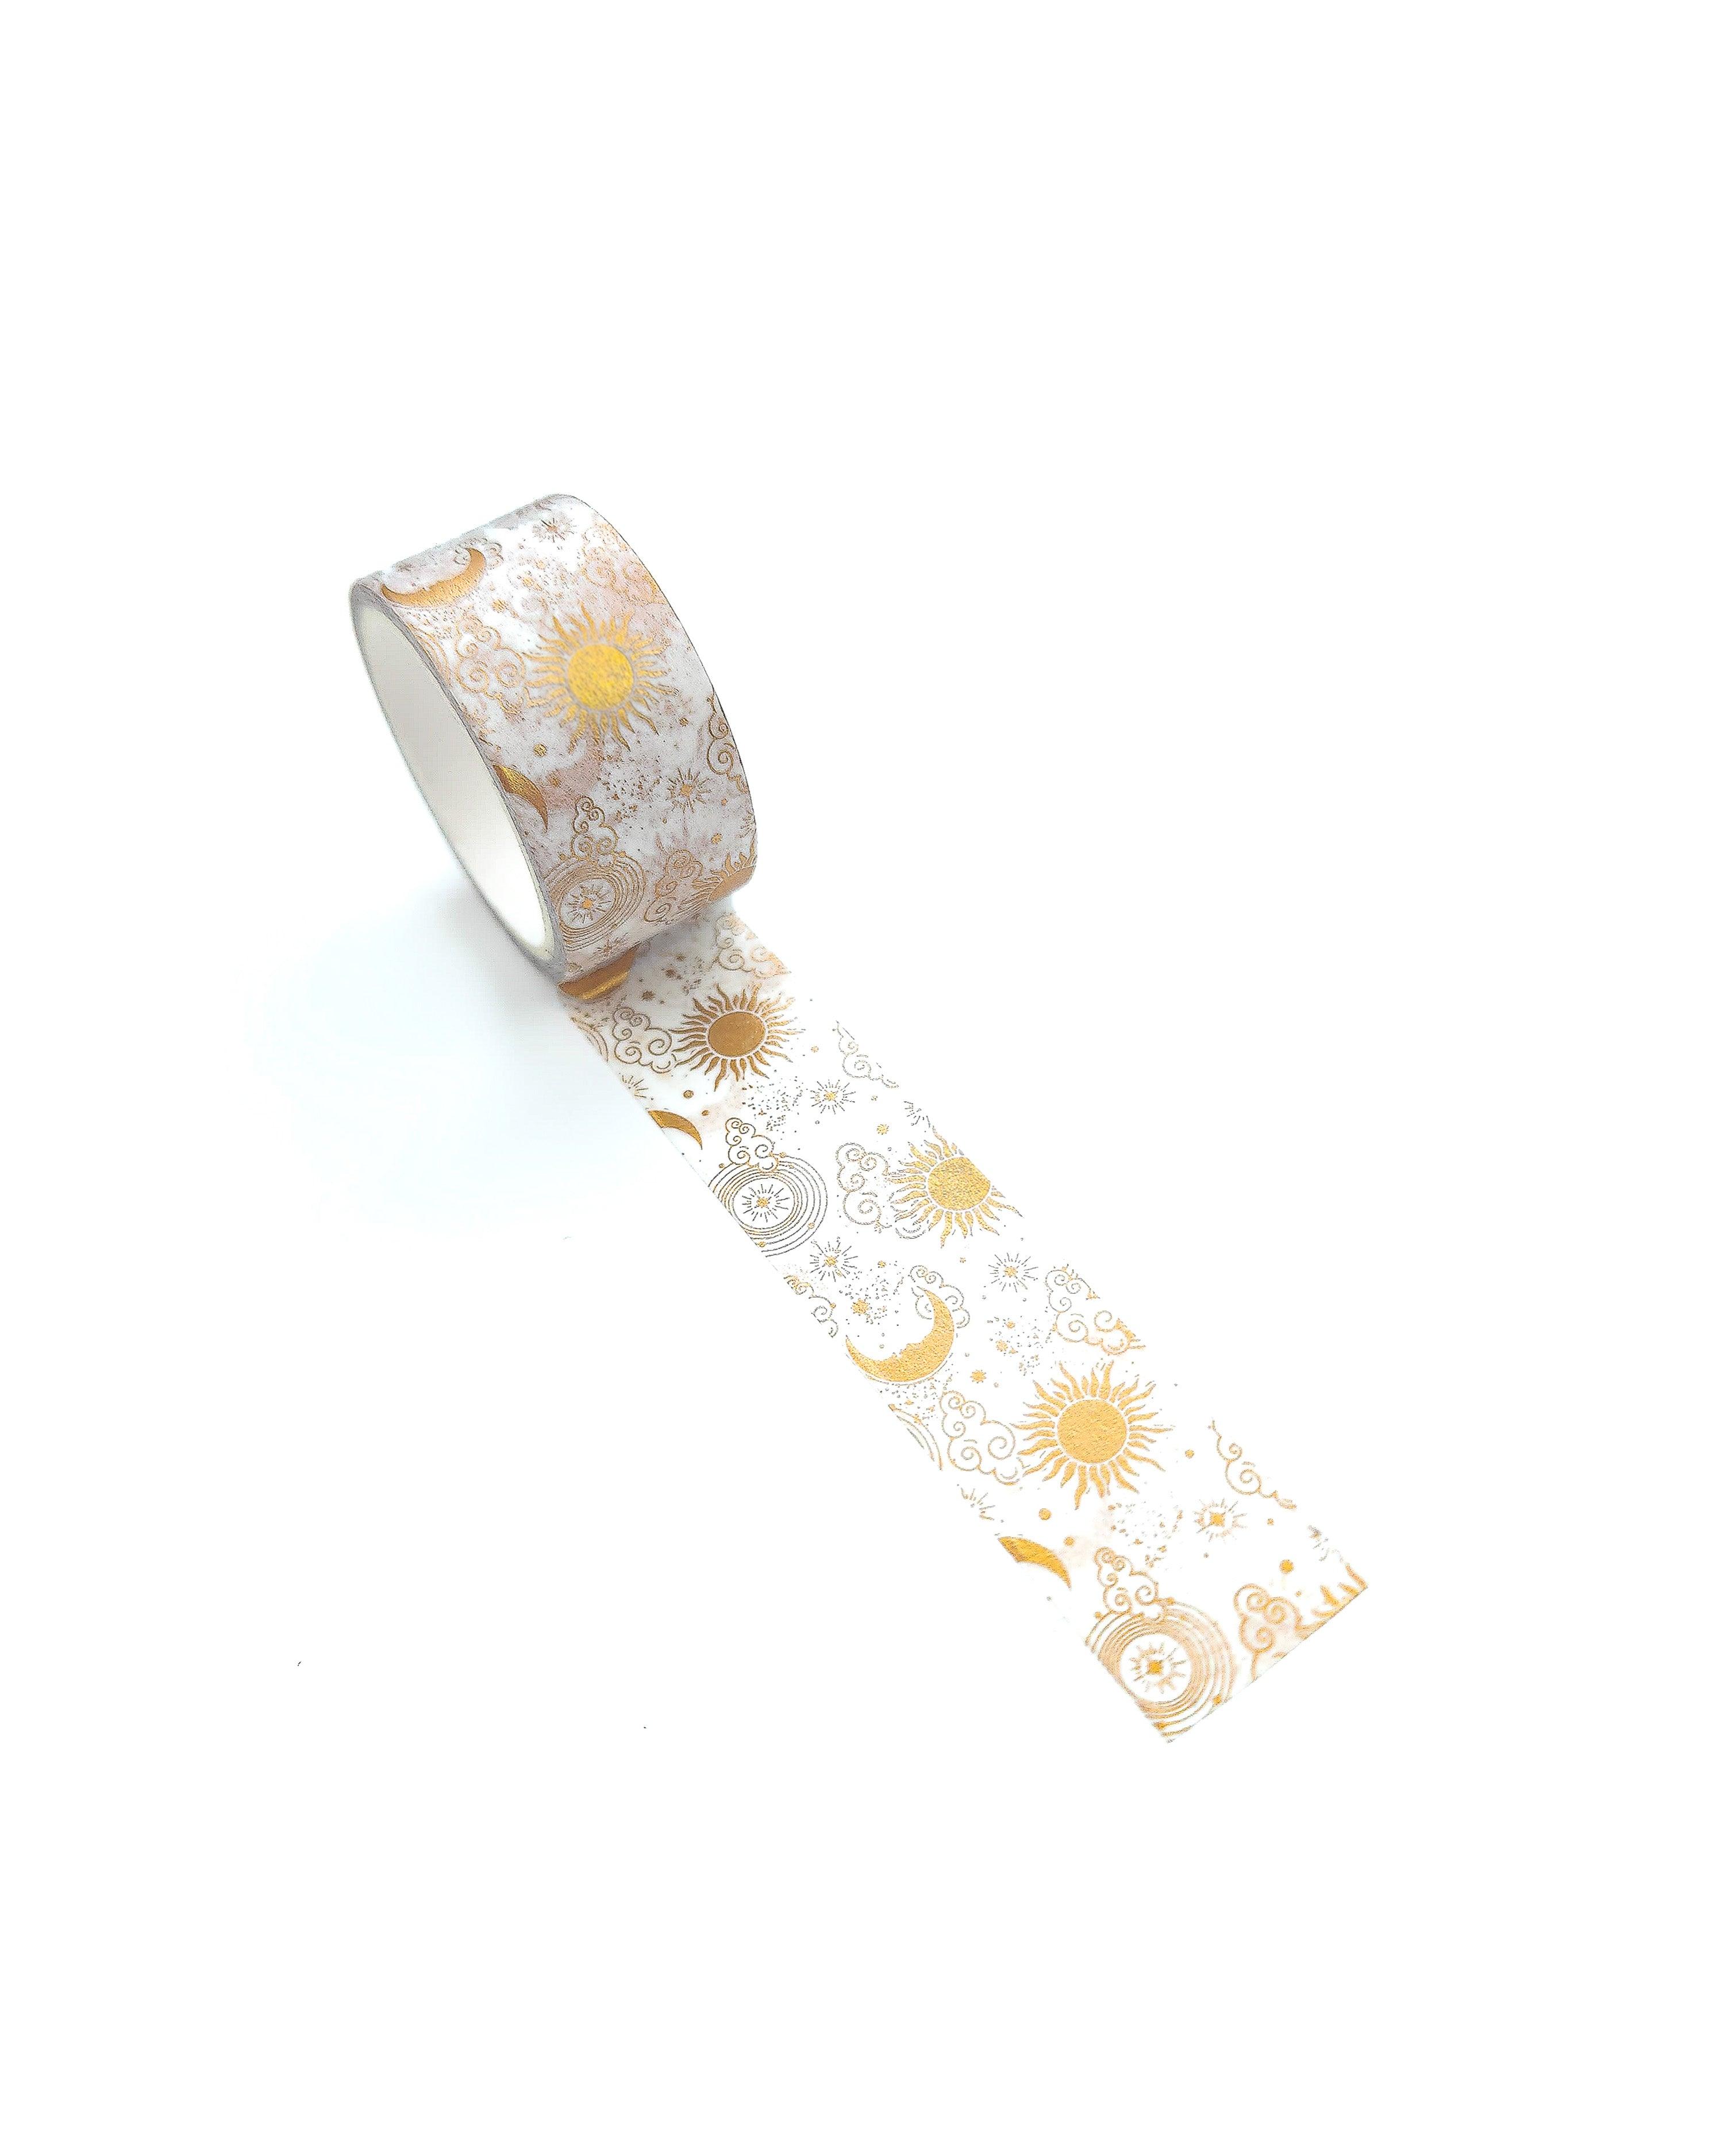 Gold foiled celestial washi tape by Jane's Agenda.